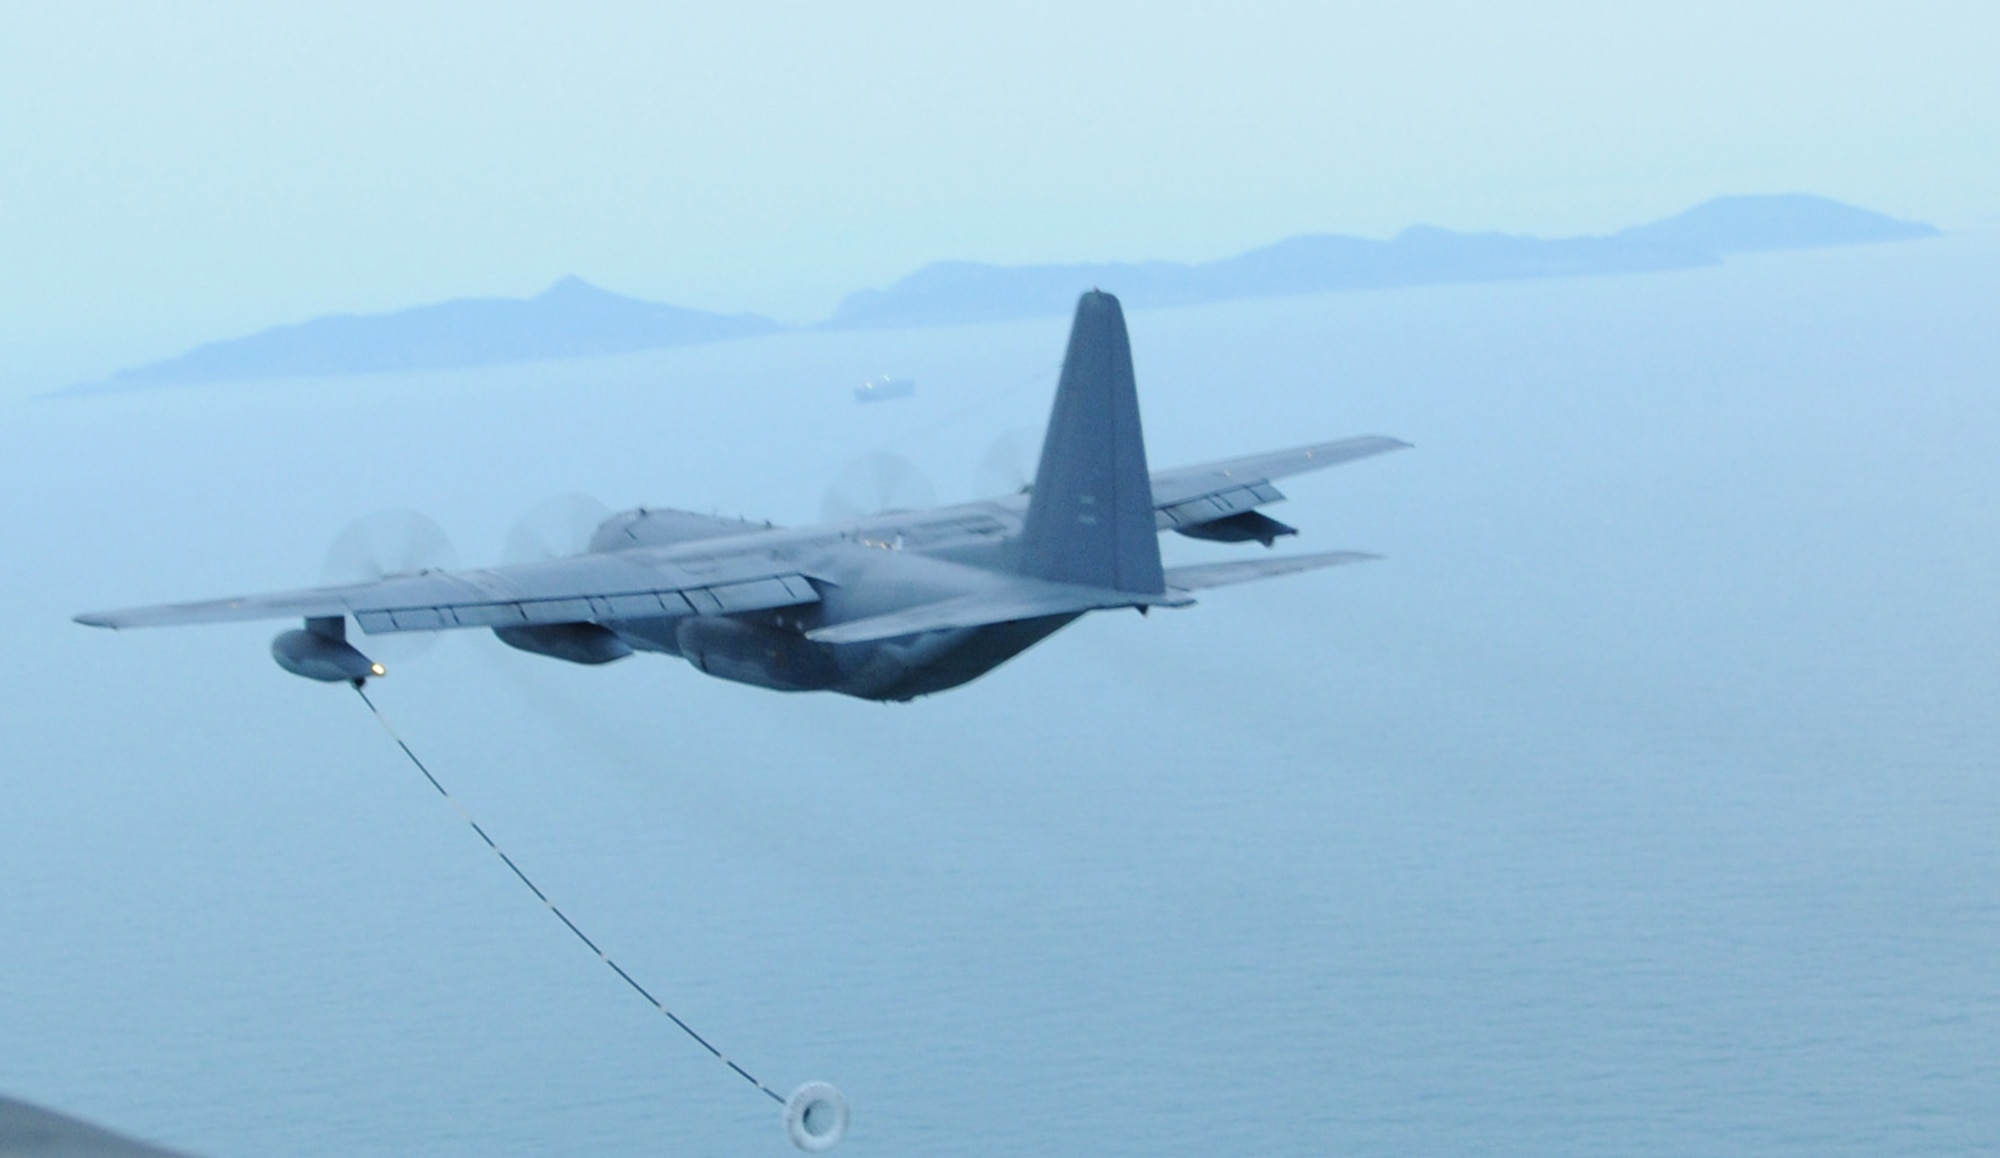 OVER THE REPUBLIC OF KOREA -- A MC-130P Combat Shadow from the 17th Special Operations Squadron releases a hose and drogue refueling pod to refuel a U.S. Army MH-47 helicopter from the 160th Special Operations Aviation Regiment (Airborne) during a training mission here March 30 during Foal Eagle 2009.  Foal Eagle is an annual combined training exercise for U.S. and Republic of Korea forces to evaluate and improve their ability to coordinate procedures, plans and systems necessary to defend the ROK. The 17th SOS is deployed from Kadena Air Base, Japan, and the 160th SOAR is deployed from Fort Lewis, Wash. (U.S. Air Force photo by Tech. Sgt. Aaron Cram)